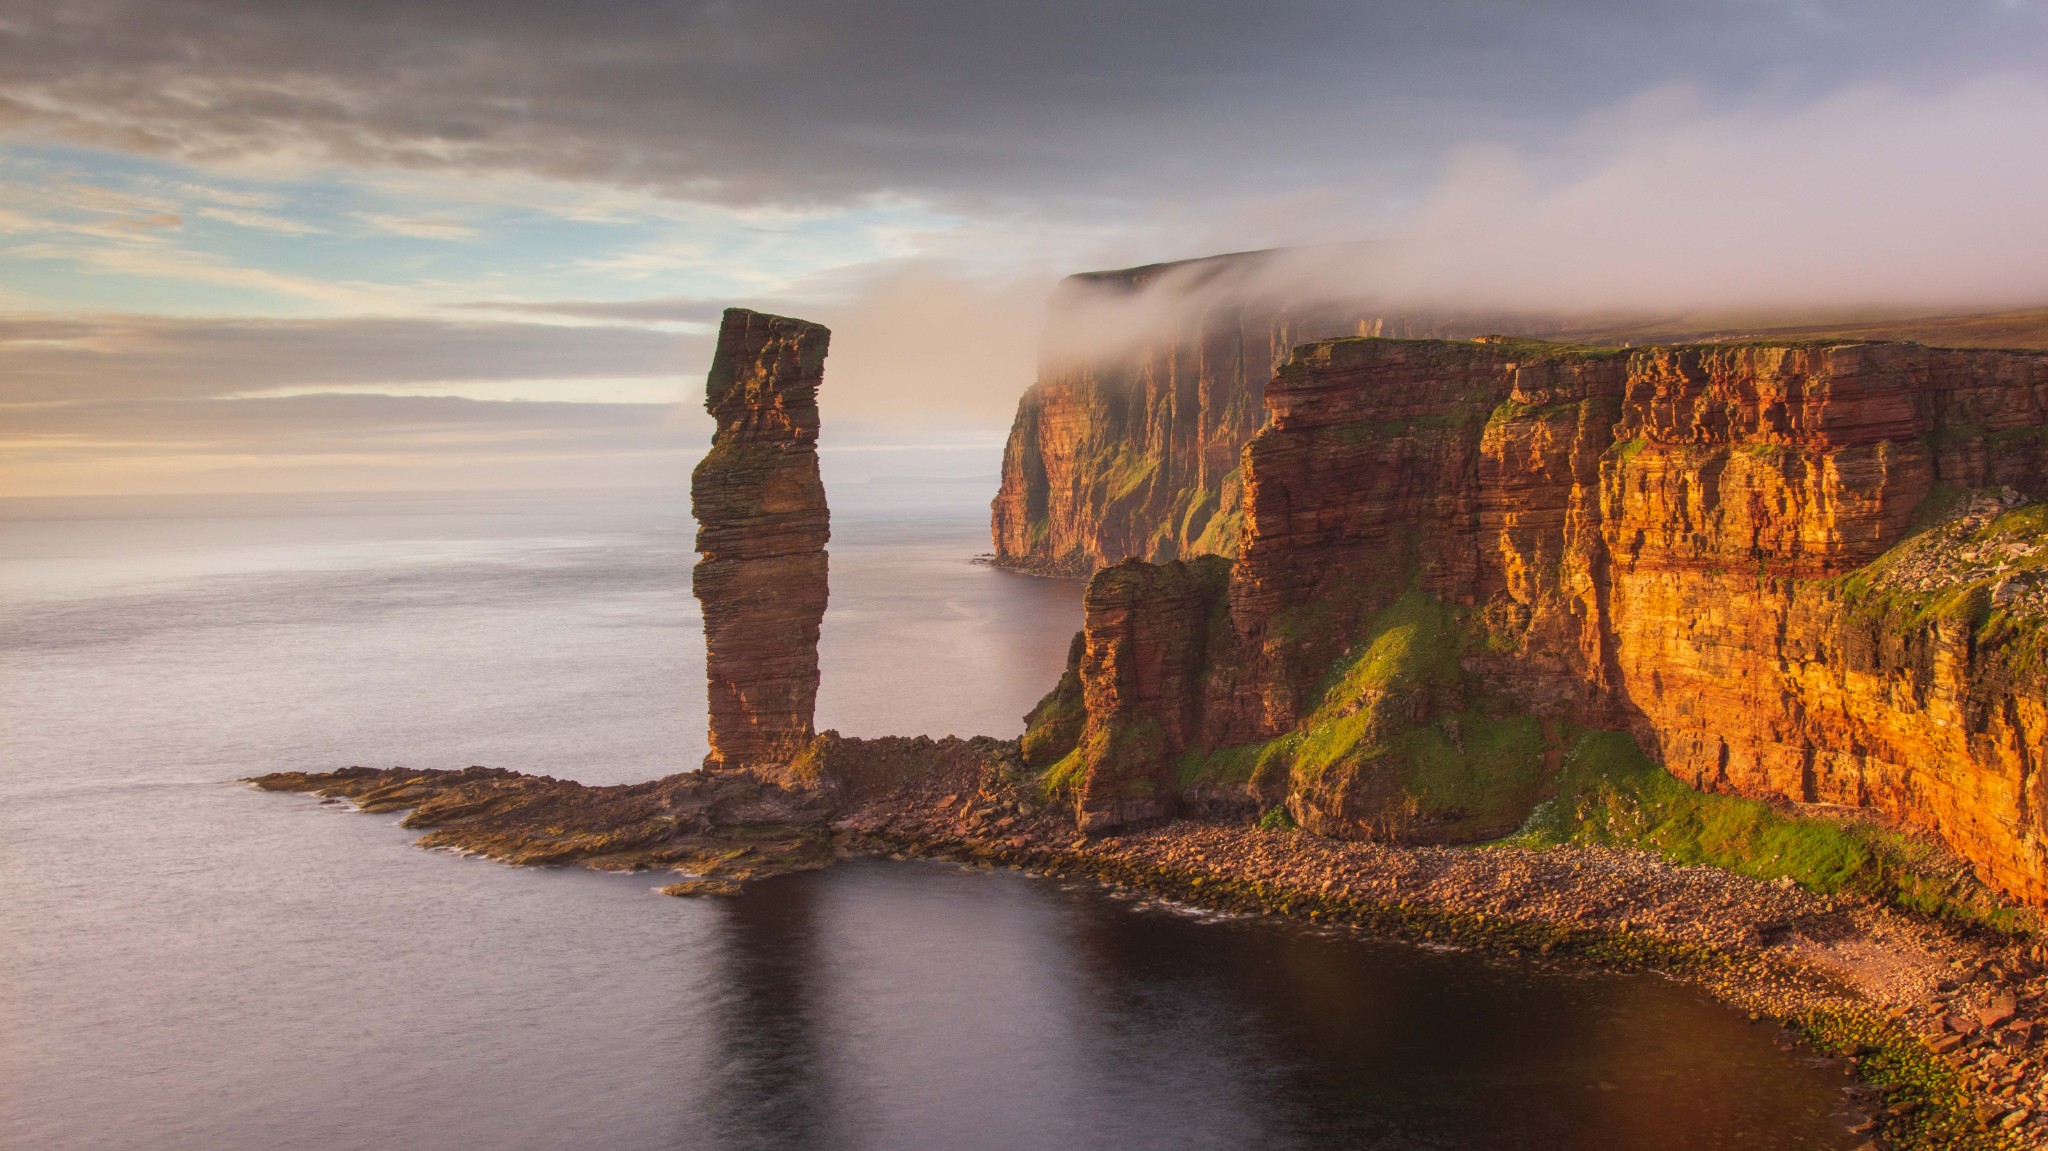 Old Man of Hoy, Orkney - image by Graham Duffin